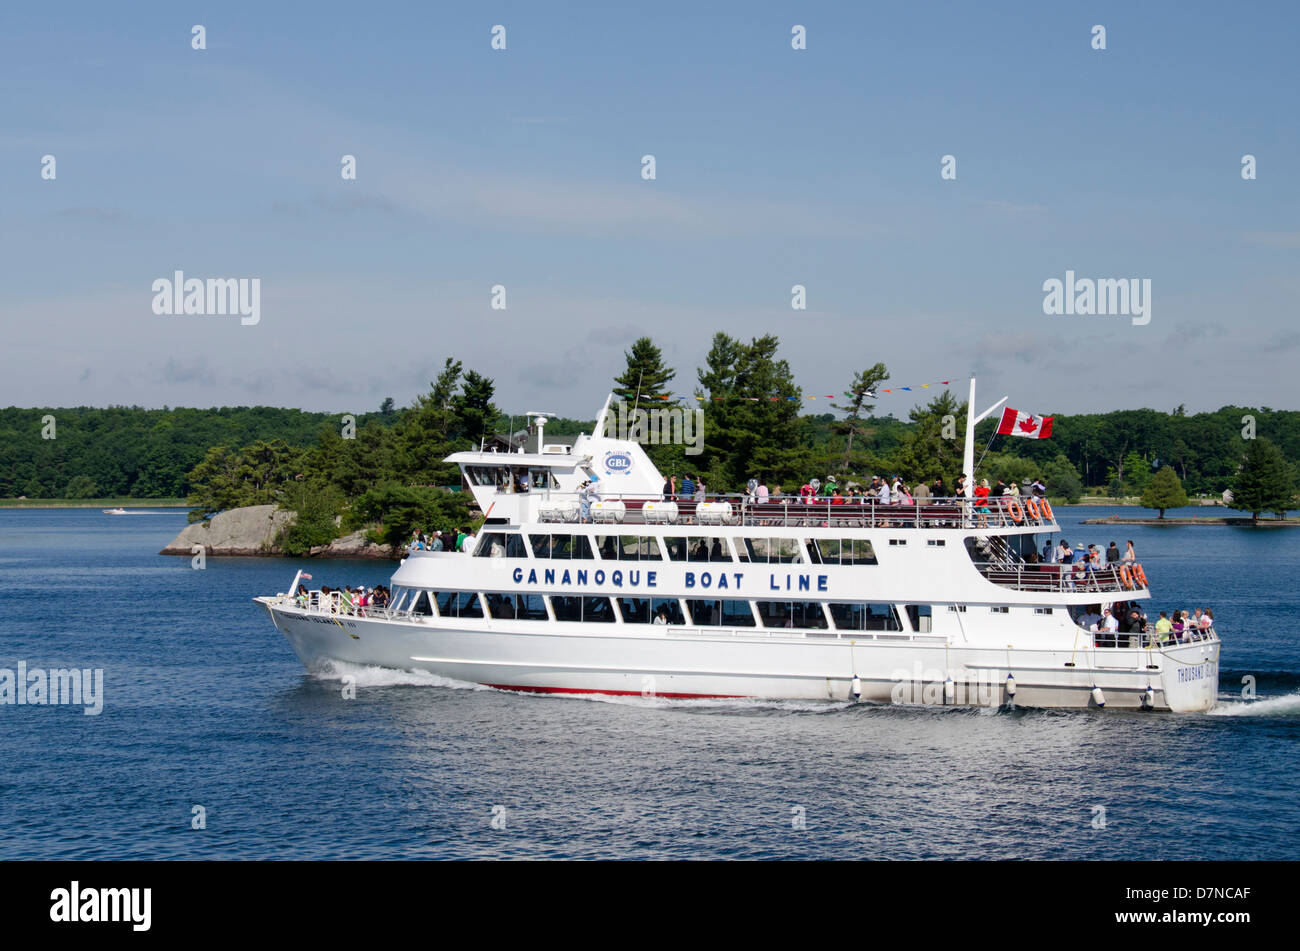 New York, St. Lawrence Seaway, Thousand Islands. The 'American Narrows' scenic waterway along the US and Canadian border. Stock Photo